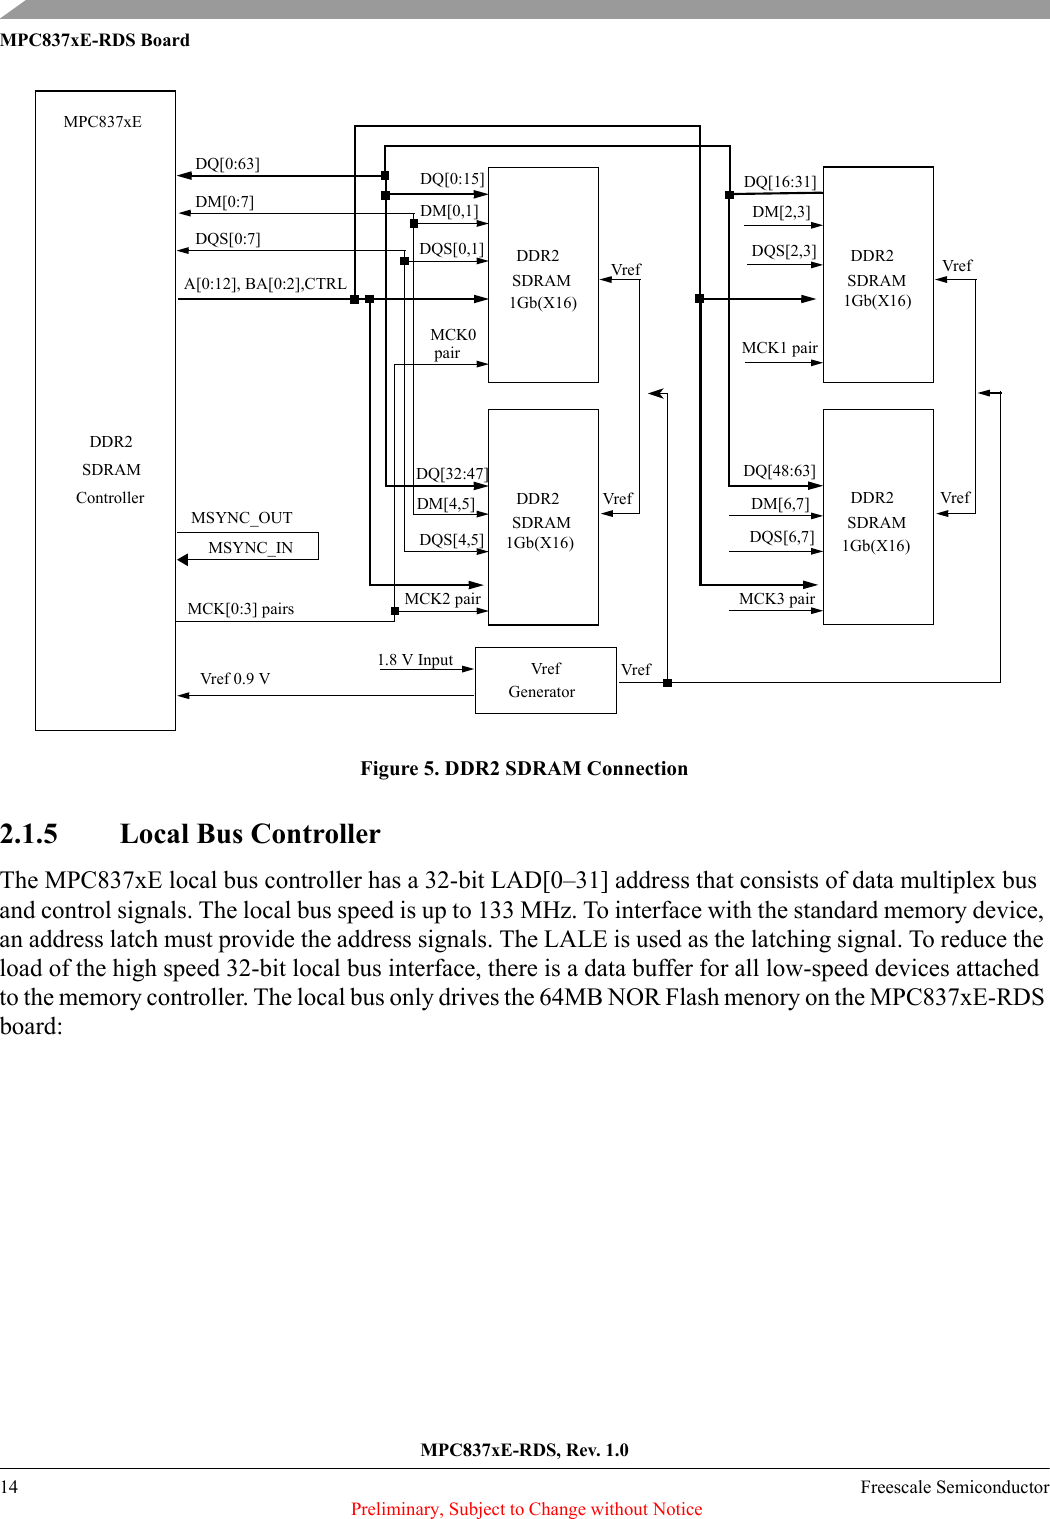 MPC837xE-RDS, Rev. 1.014 Freescale Semiconductor Preliminary, Subject to Change without NoticeMPC837xE-RDS BoardFigure 5. DDR2 SDRAM Connection2.1.5 Local Bus ControllerThe MPC837xE local bus controller has a 32-bit LAD[0–31] address that consists of data multiplex bus and control signals. The local bus speed is up to 133 MHz. To interface with the standard memory device, an address latch must provide the address signals. The LALE is used as the latching signal. To reduce the load of the high speed 32-bit local bus interface, there is a data buffer for all low-speed devices attached to the memory controller. The local bus only drives the 64MB NOR Flash menory on the MPC837xE-RDS board:DDR2SDRAMControllerVrefGeneratorVref 0.9 V1.8 V Input VrefMSYNC_OUTMSYNC_INMPC837xEDDR2SDRAMVrefVrefDQ[0:63]DQ[32:47]DQ[0:15]DM[0:7] DM[0,1]DM[4,5]DQS[0:7] DQS[0,1]DQS[4,5]A[0:12], BA[0:2],CTRLMCK[0:3] pairsMCK0MCK2 pairDDR2SDRAMDDR2SDRAMDQ[48:63]DQ[16:31]DM[2,3]DM[6,7]DQS[2,3]DQS[6,7]MCK1 pairMCK3 pairDDR2SDRAMVrefVref1Gb(X16) 1Gb(X16)1Gb(X16) 1Gb(X16) pair